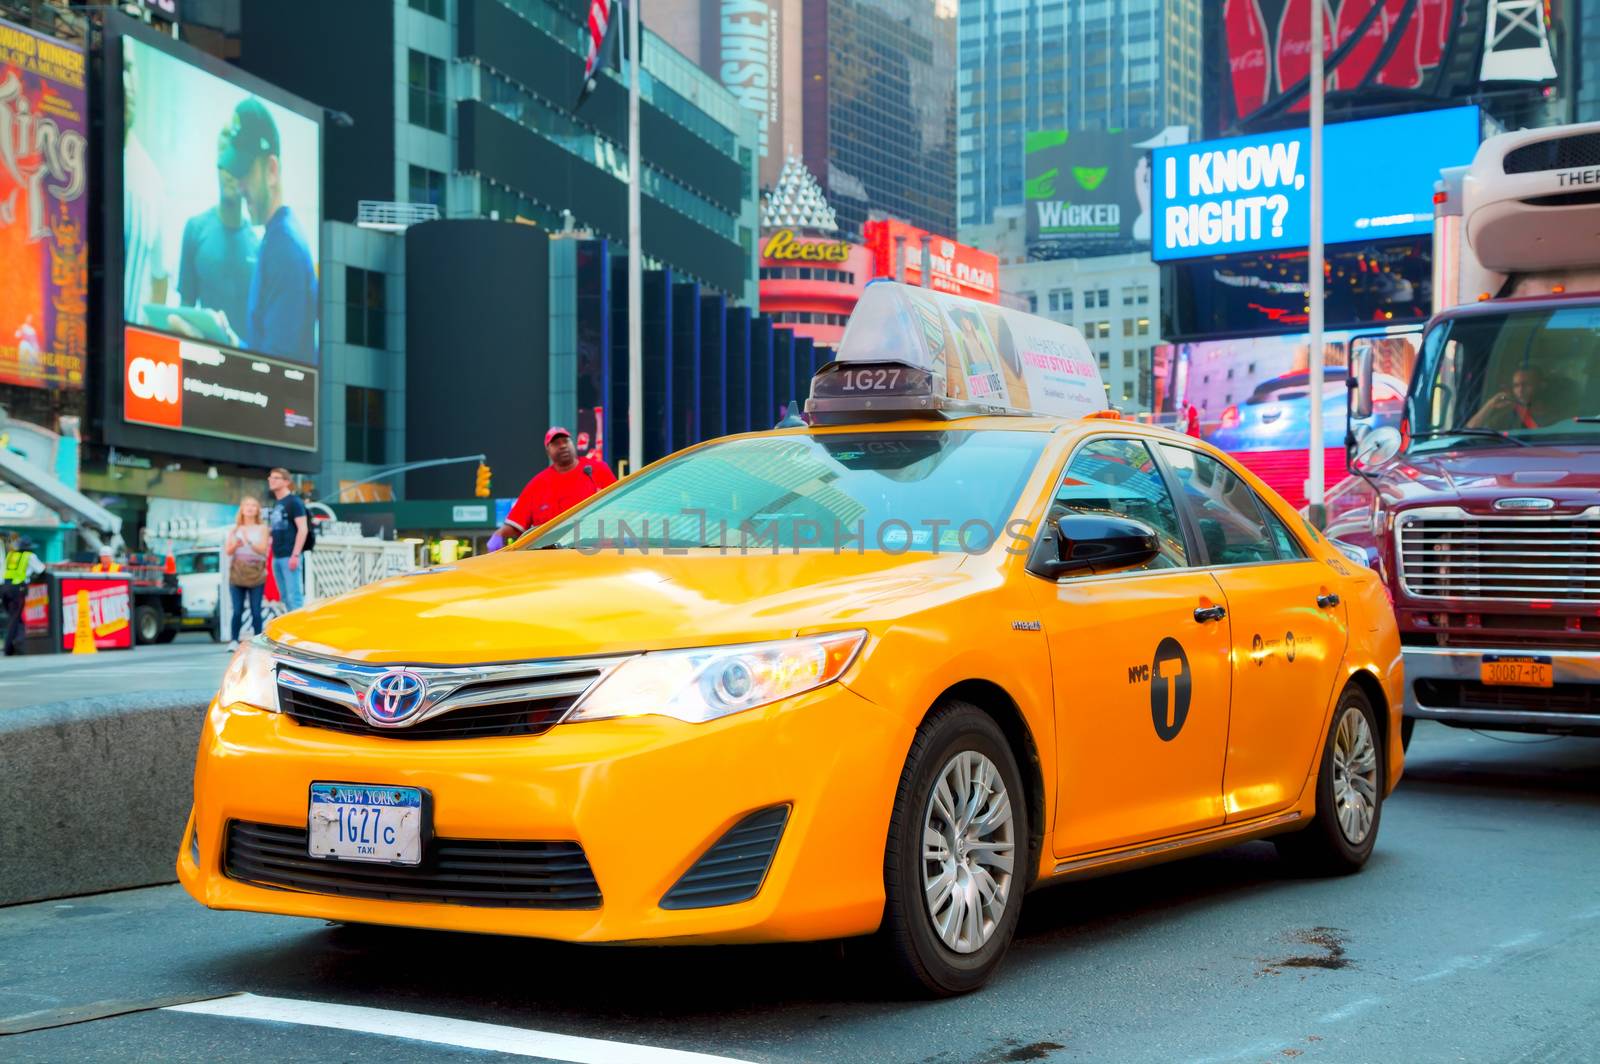 Yellow cab at Times square in New York City by AndreyKr